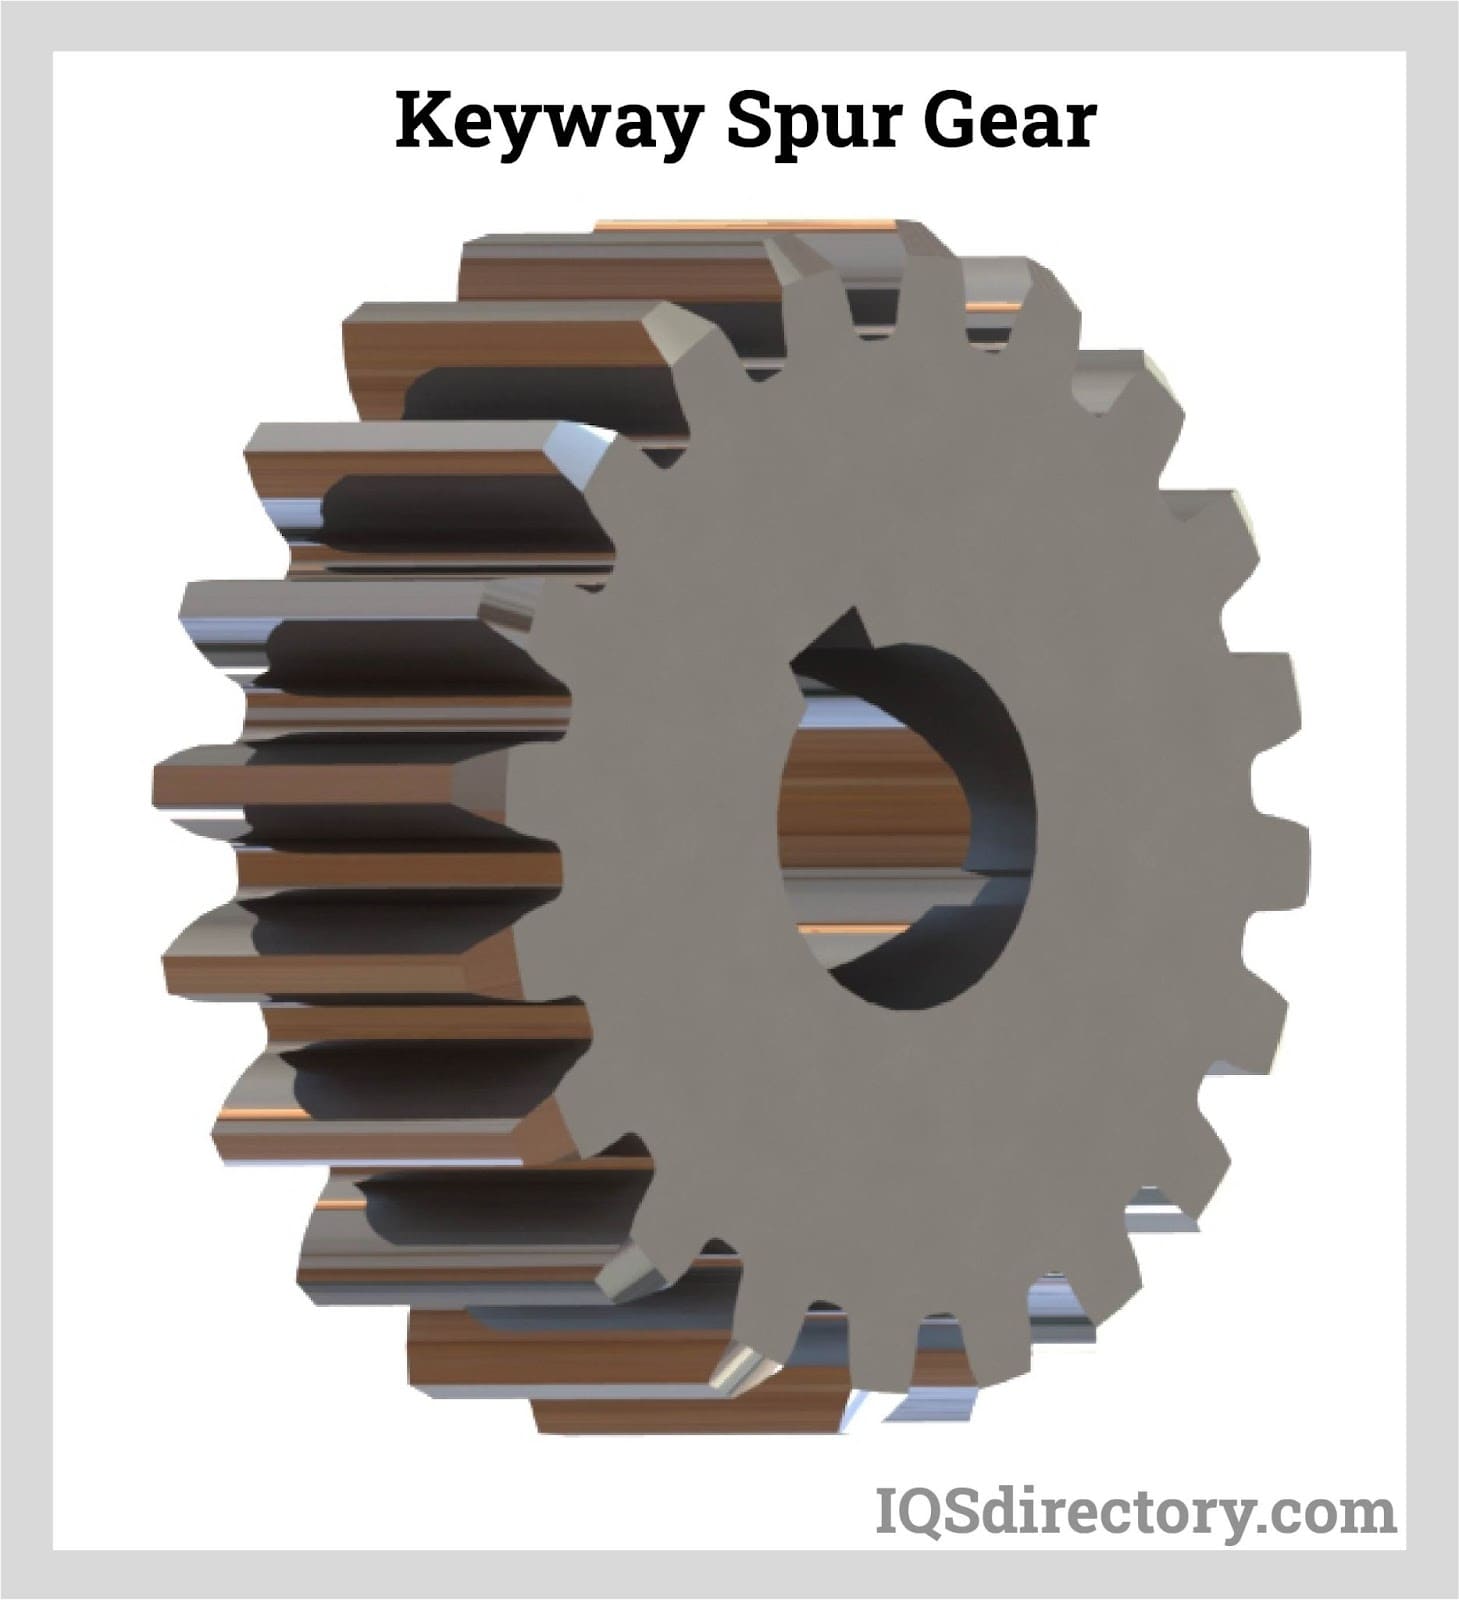 Spur Gear: Definition, Diagram, Terminology, Types, Applications